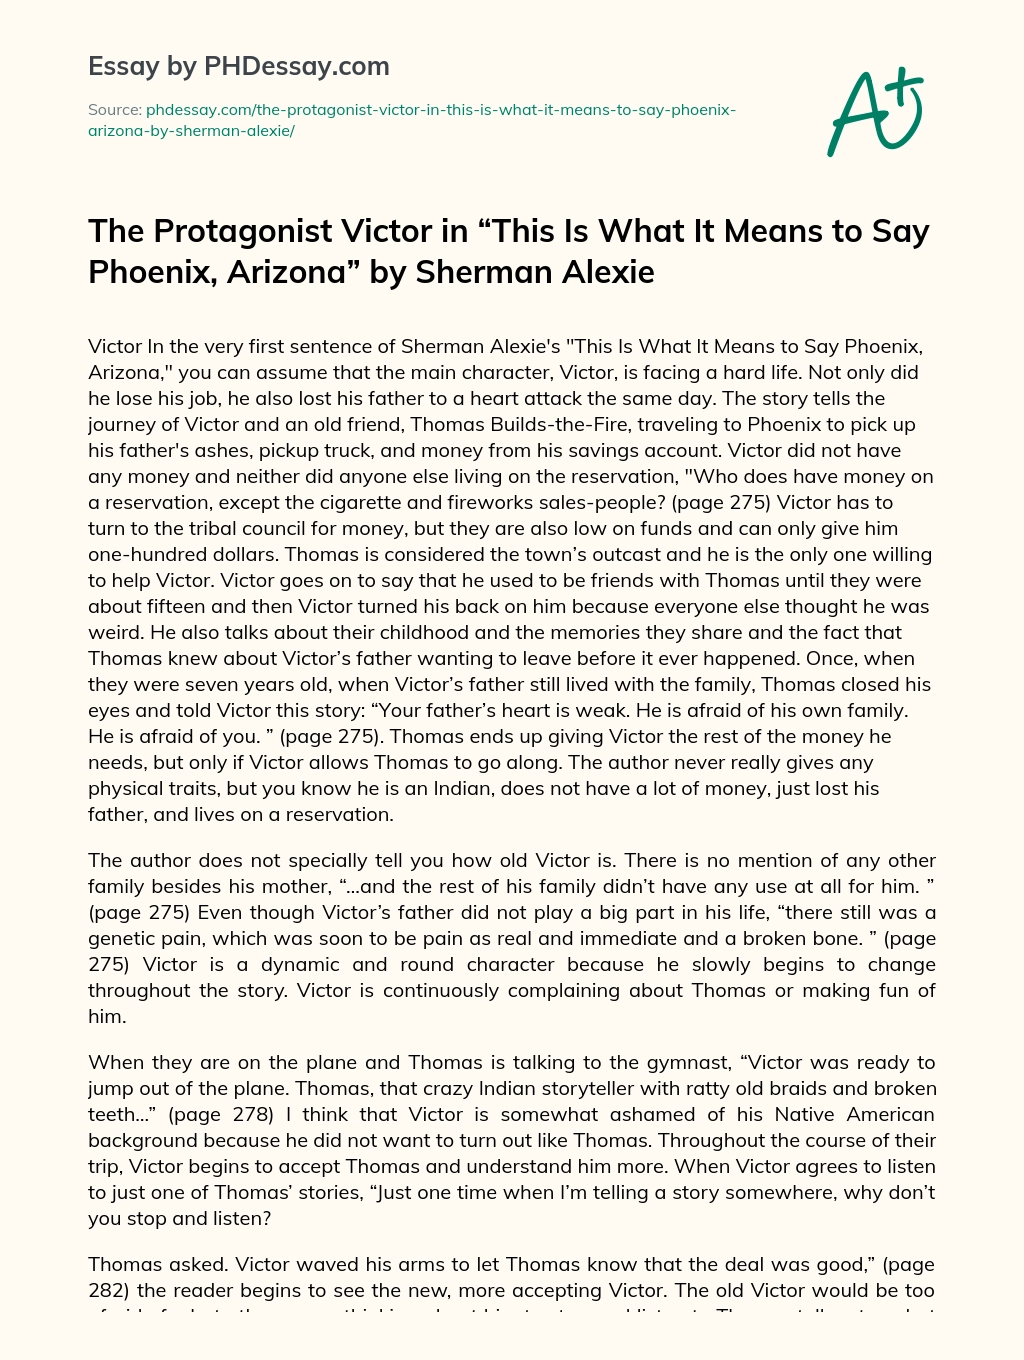 The Protagonist Victor in “This Is What It Means to Say Phoenix, Arizona” by Sherman Alexie essay